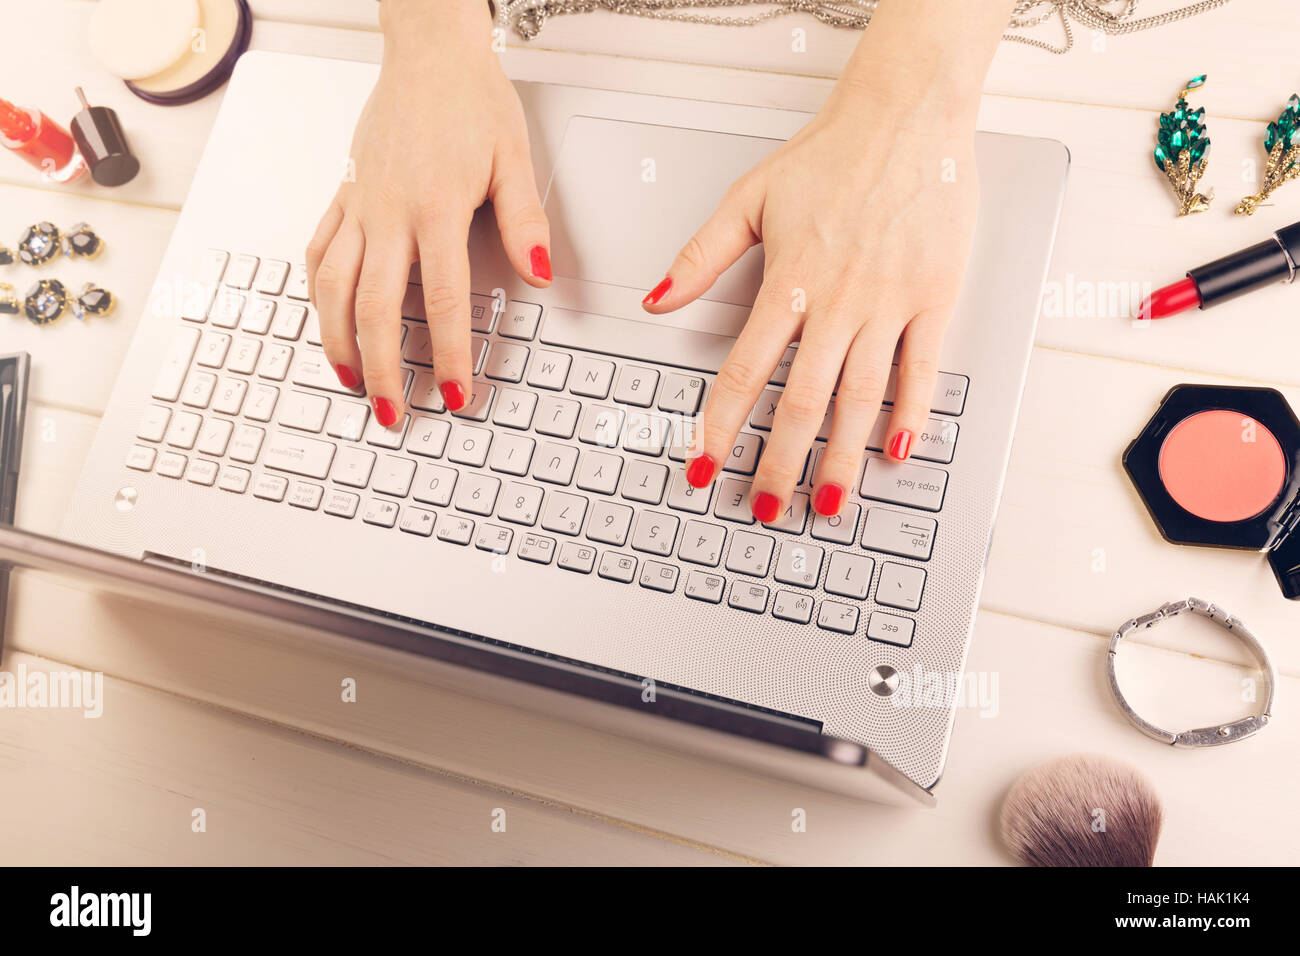 woman writing fashion blog. laptop and accessories on the table Stock Photo